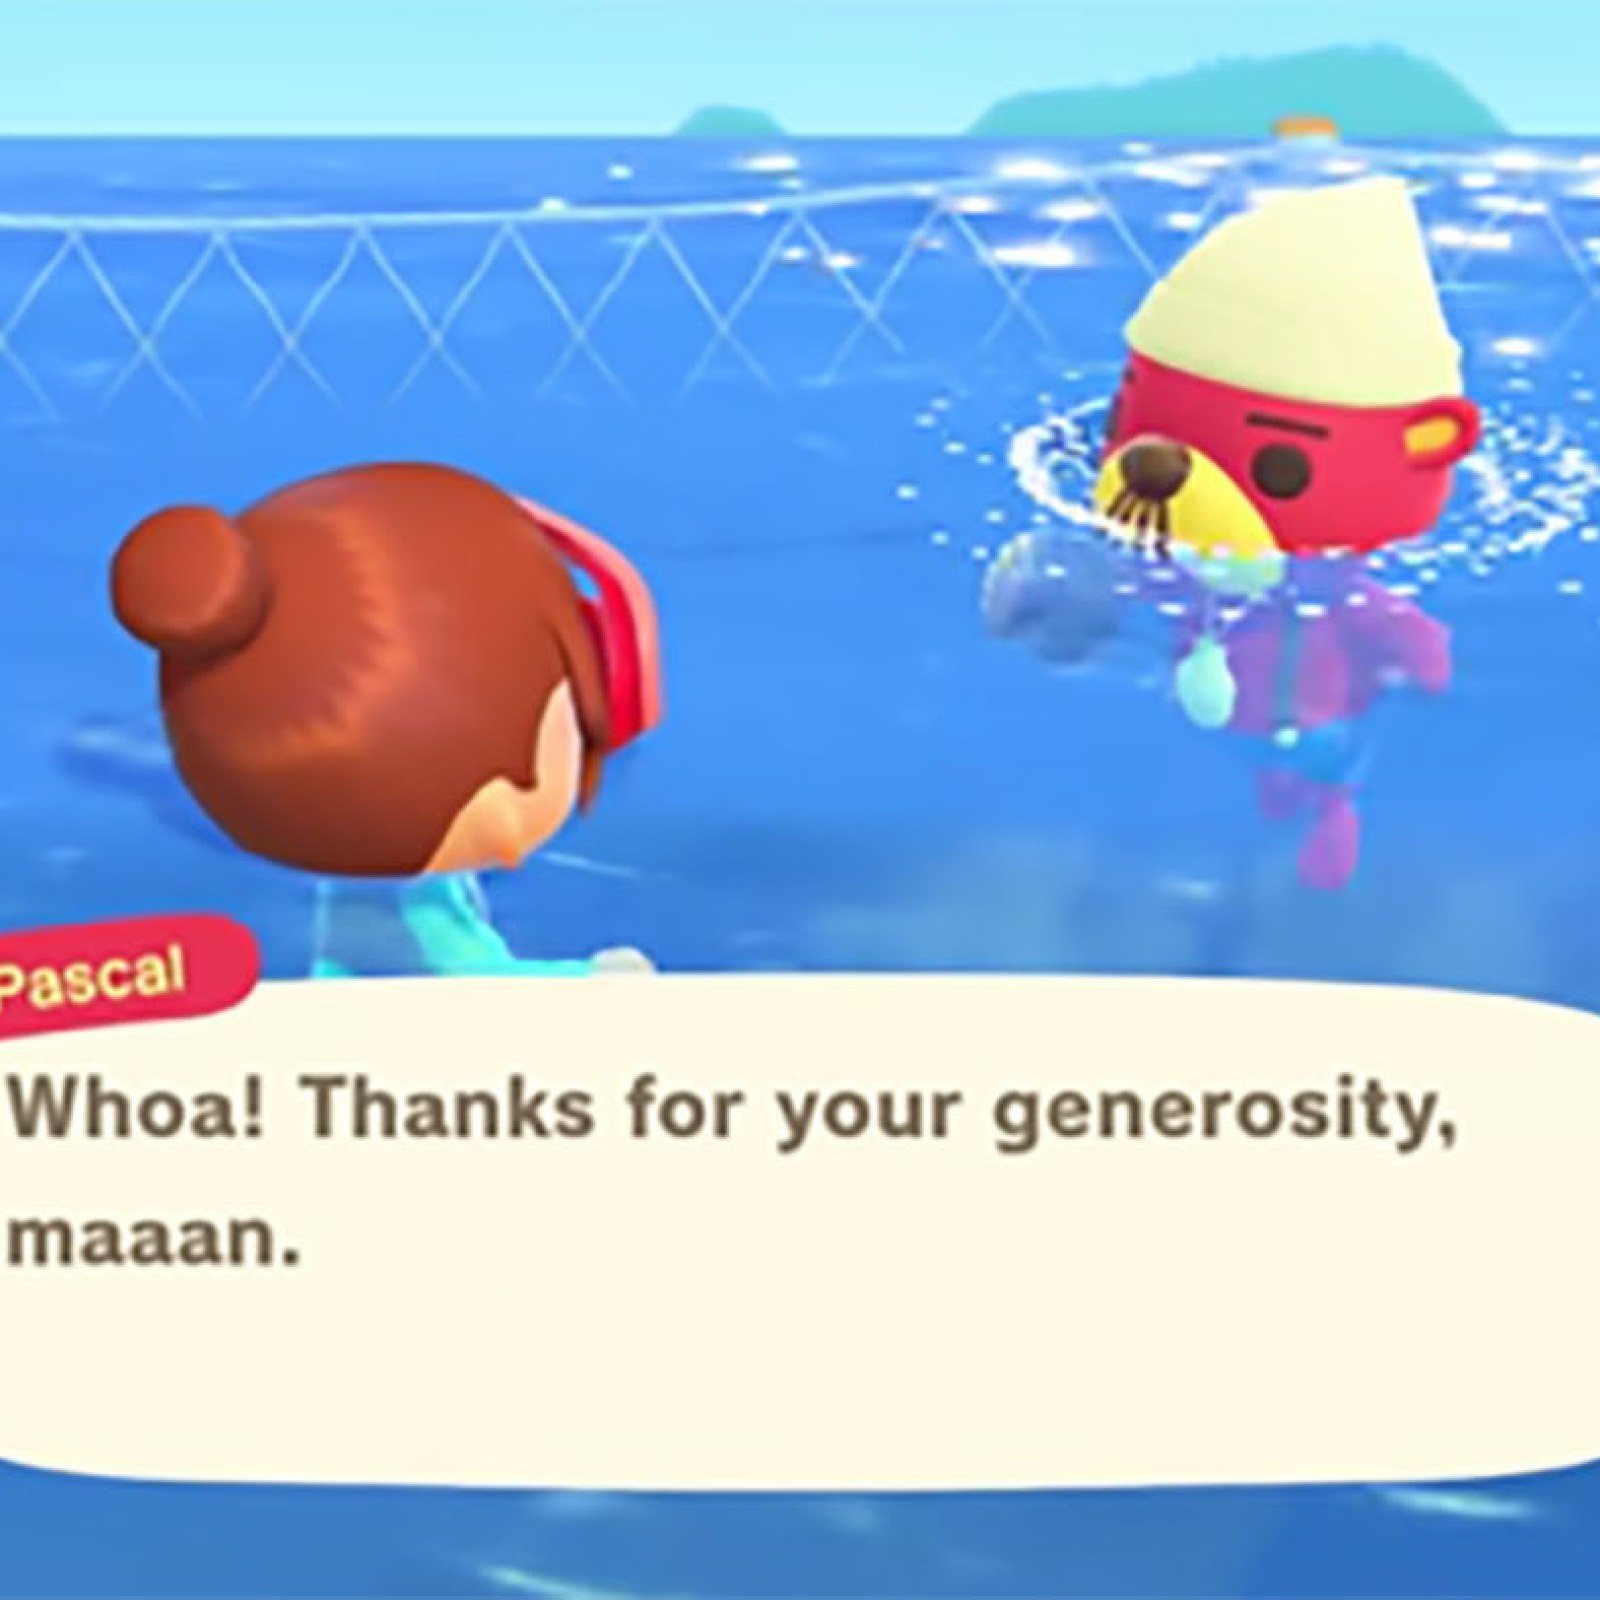 How to Catch a Scallop  Scallop Animal Crossing New Horizons